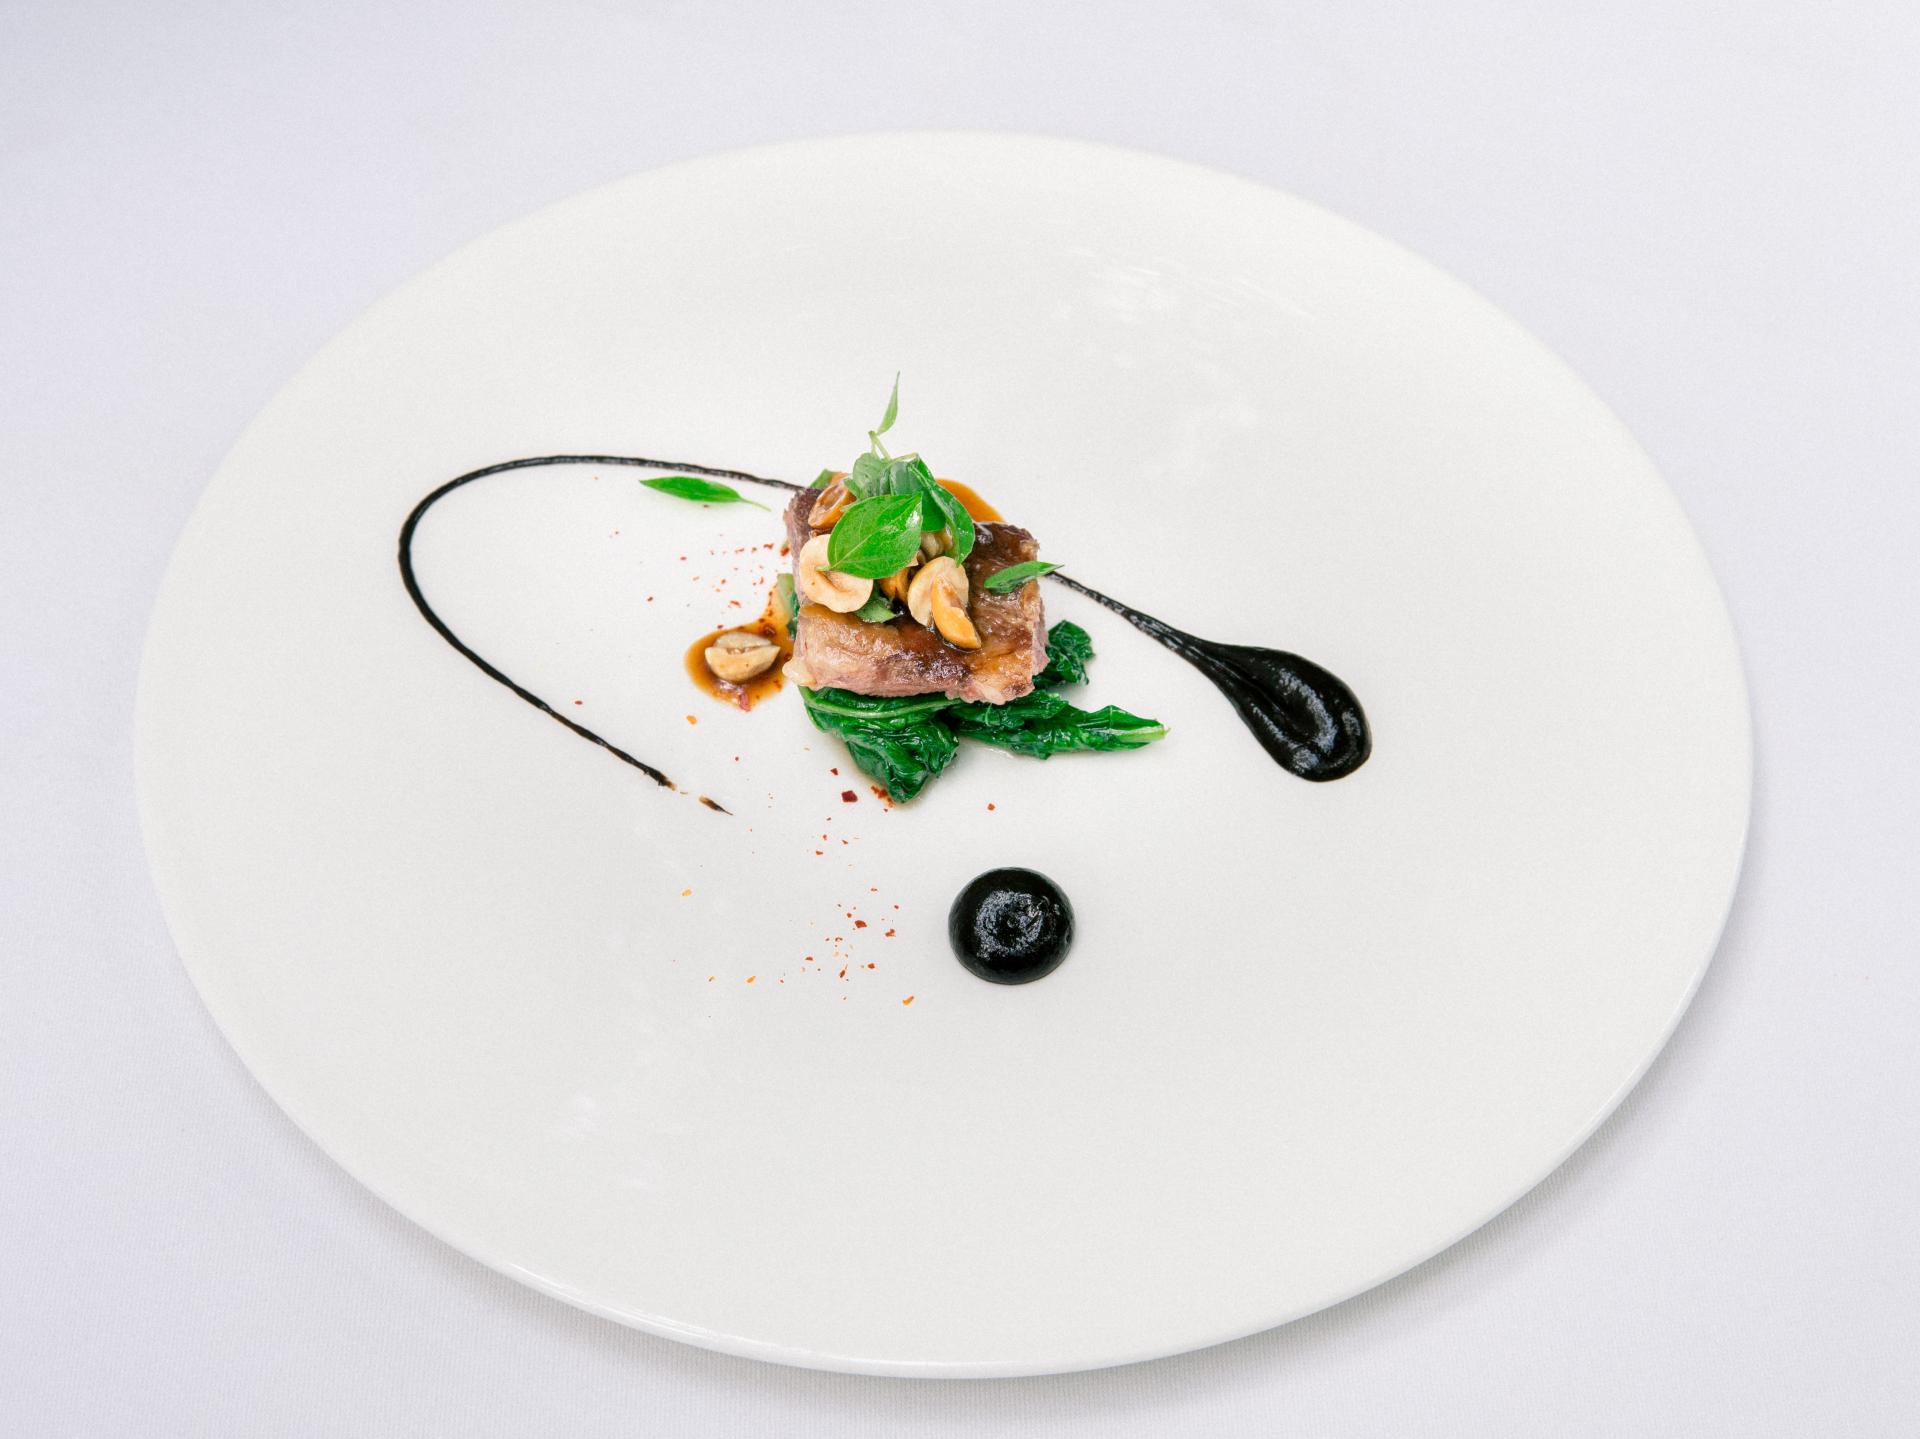 Maison Park, a refined and creative French cuisine